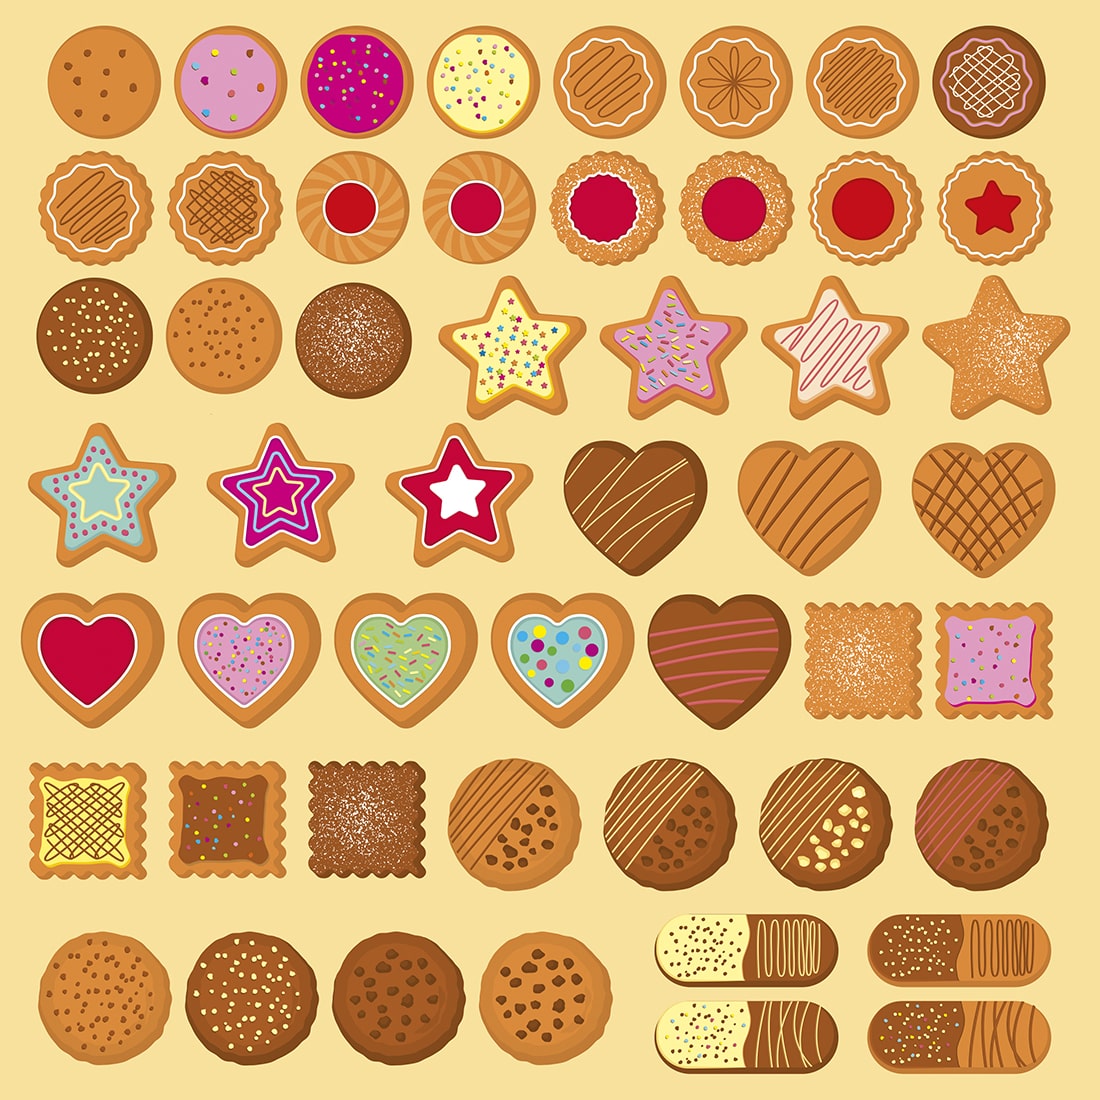 51 Cookies Vector Pro clipart preview image.